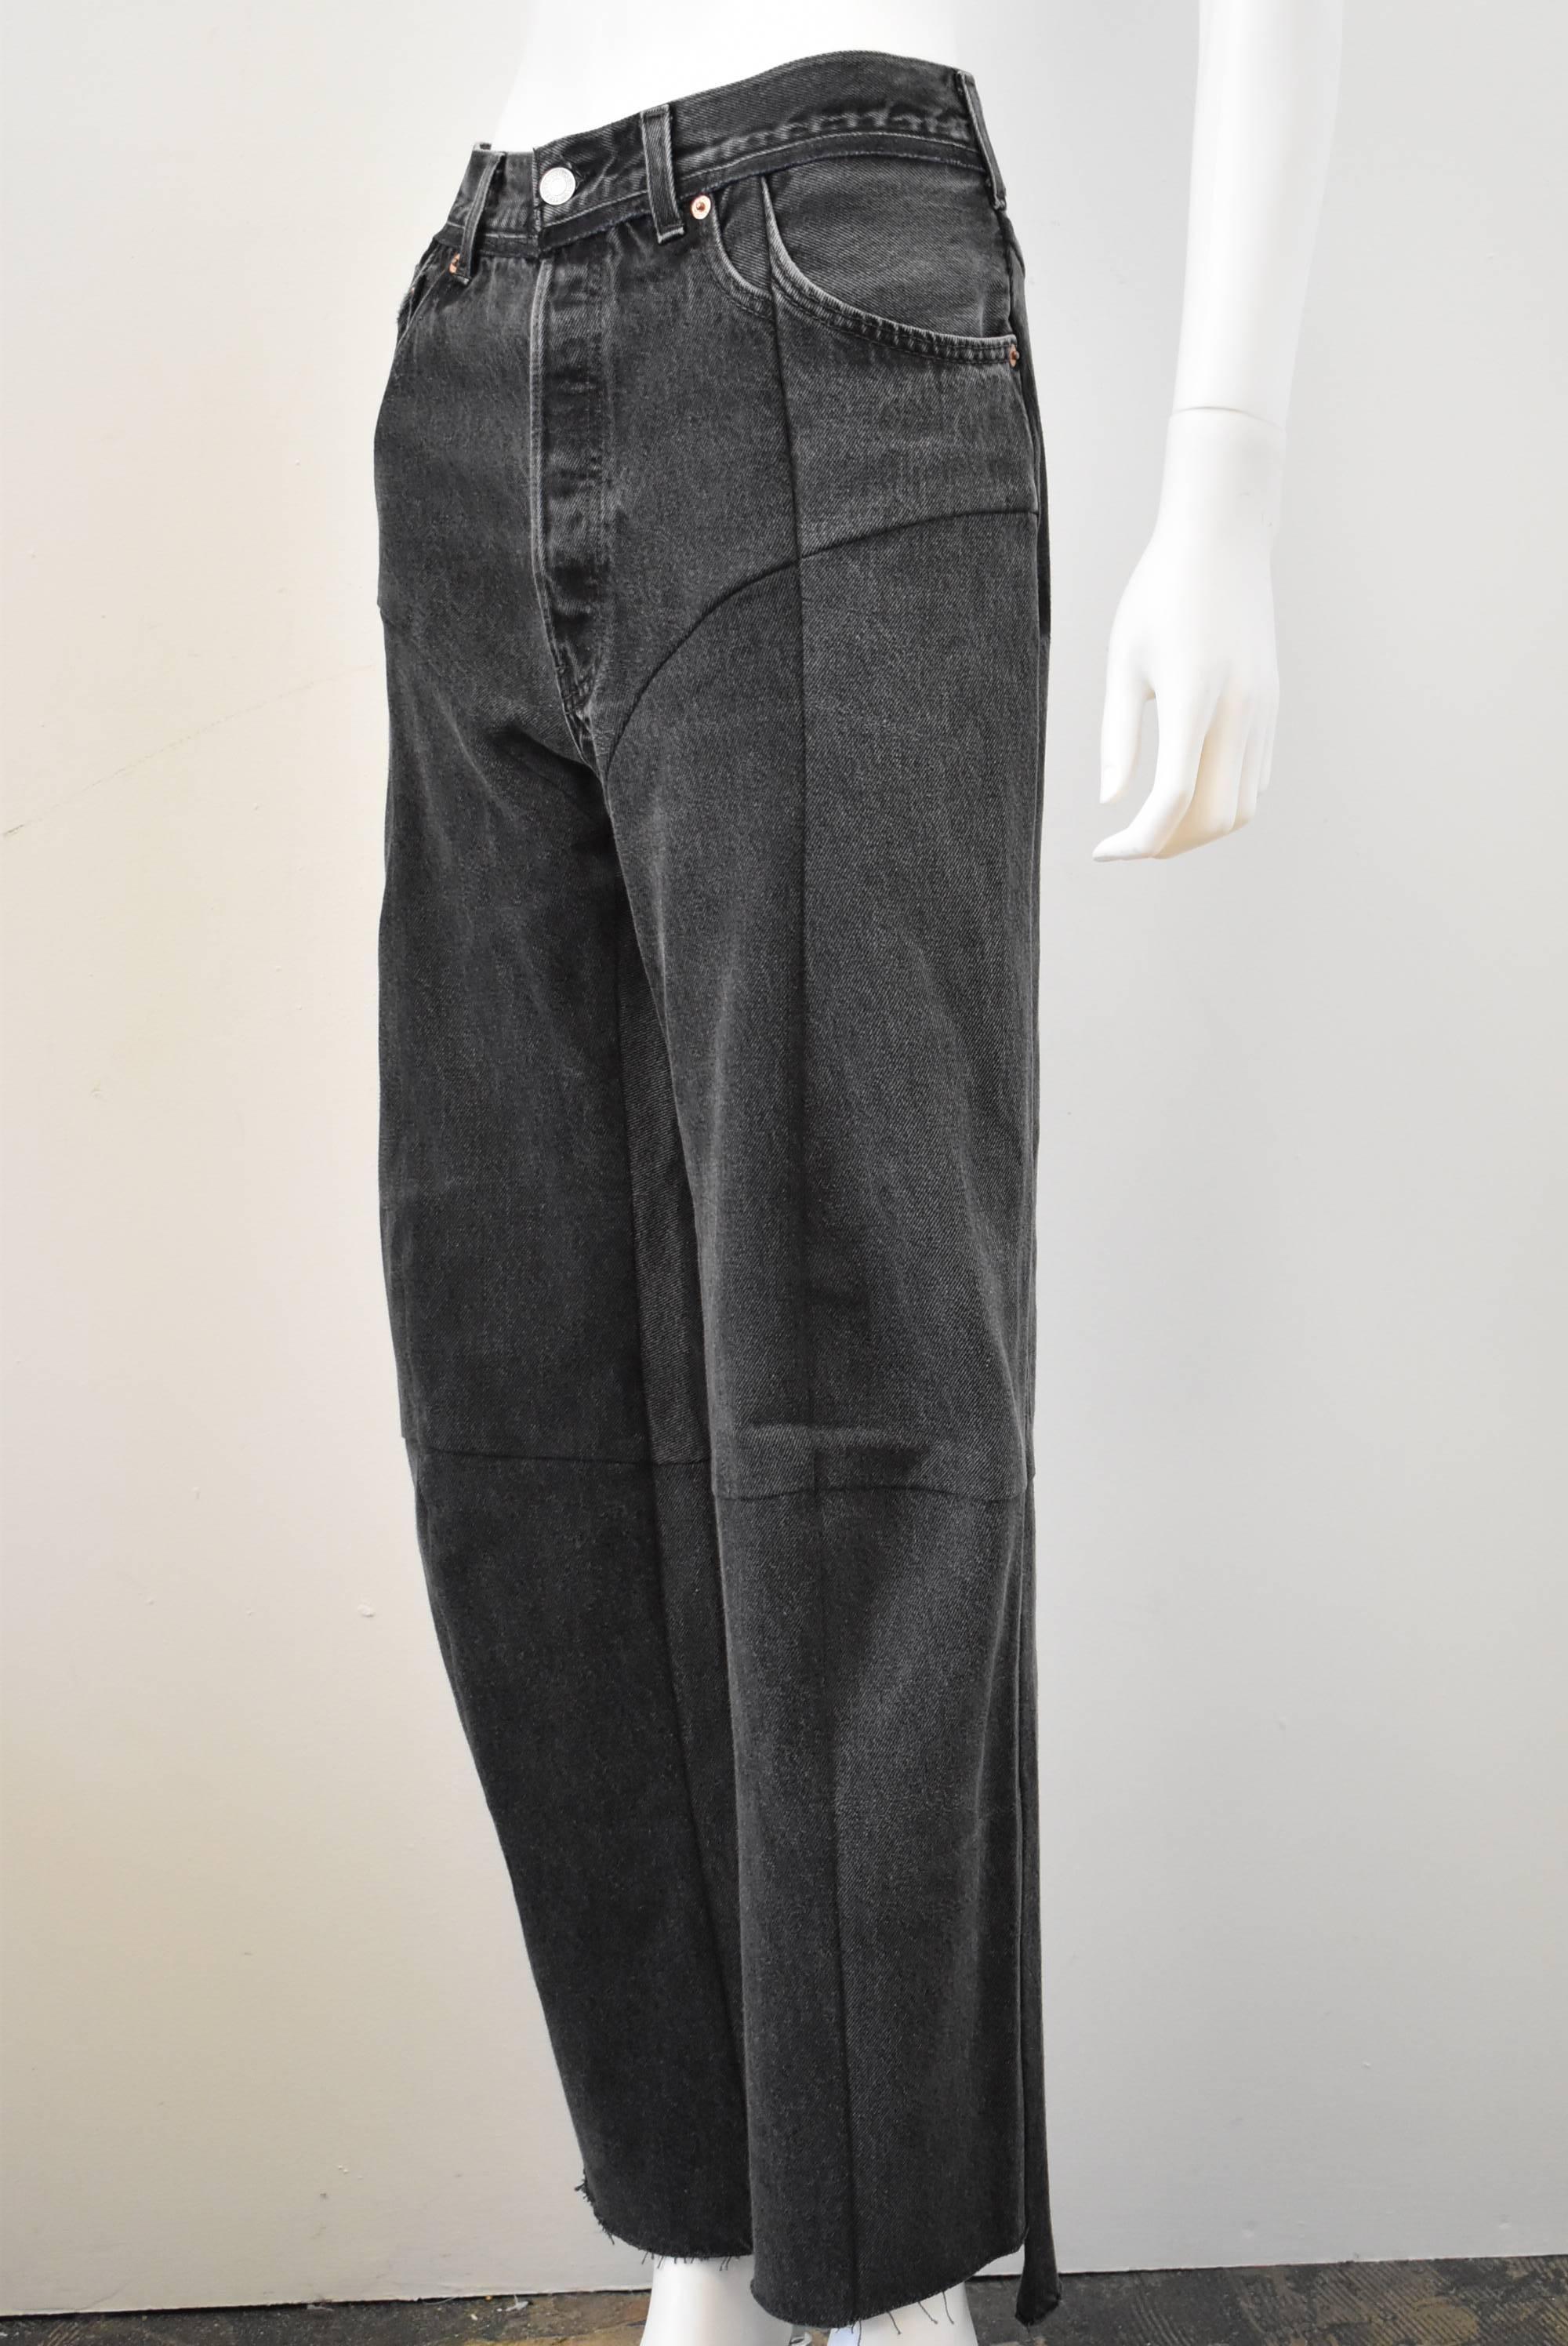 A pair of grey deconstructed jeans from Vetements. The jeans are made from several pairs of reworked Levi’s jeans that are stitched together with seams down the front and at the knee to create these signature denim-wear from the collection. The back